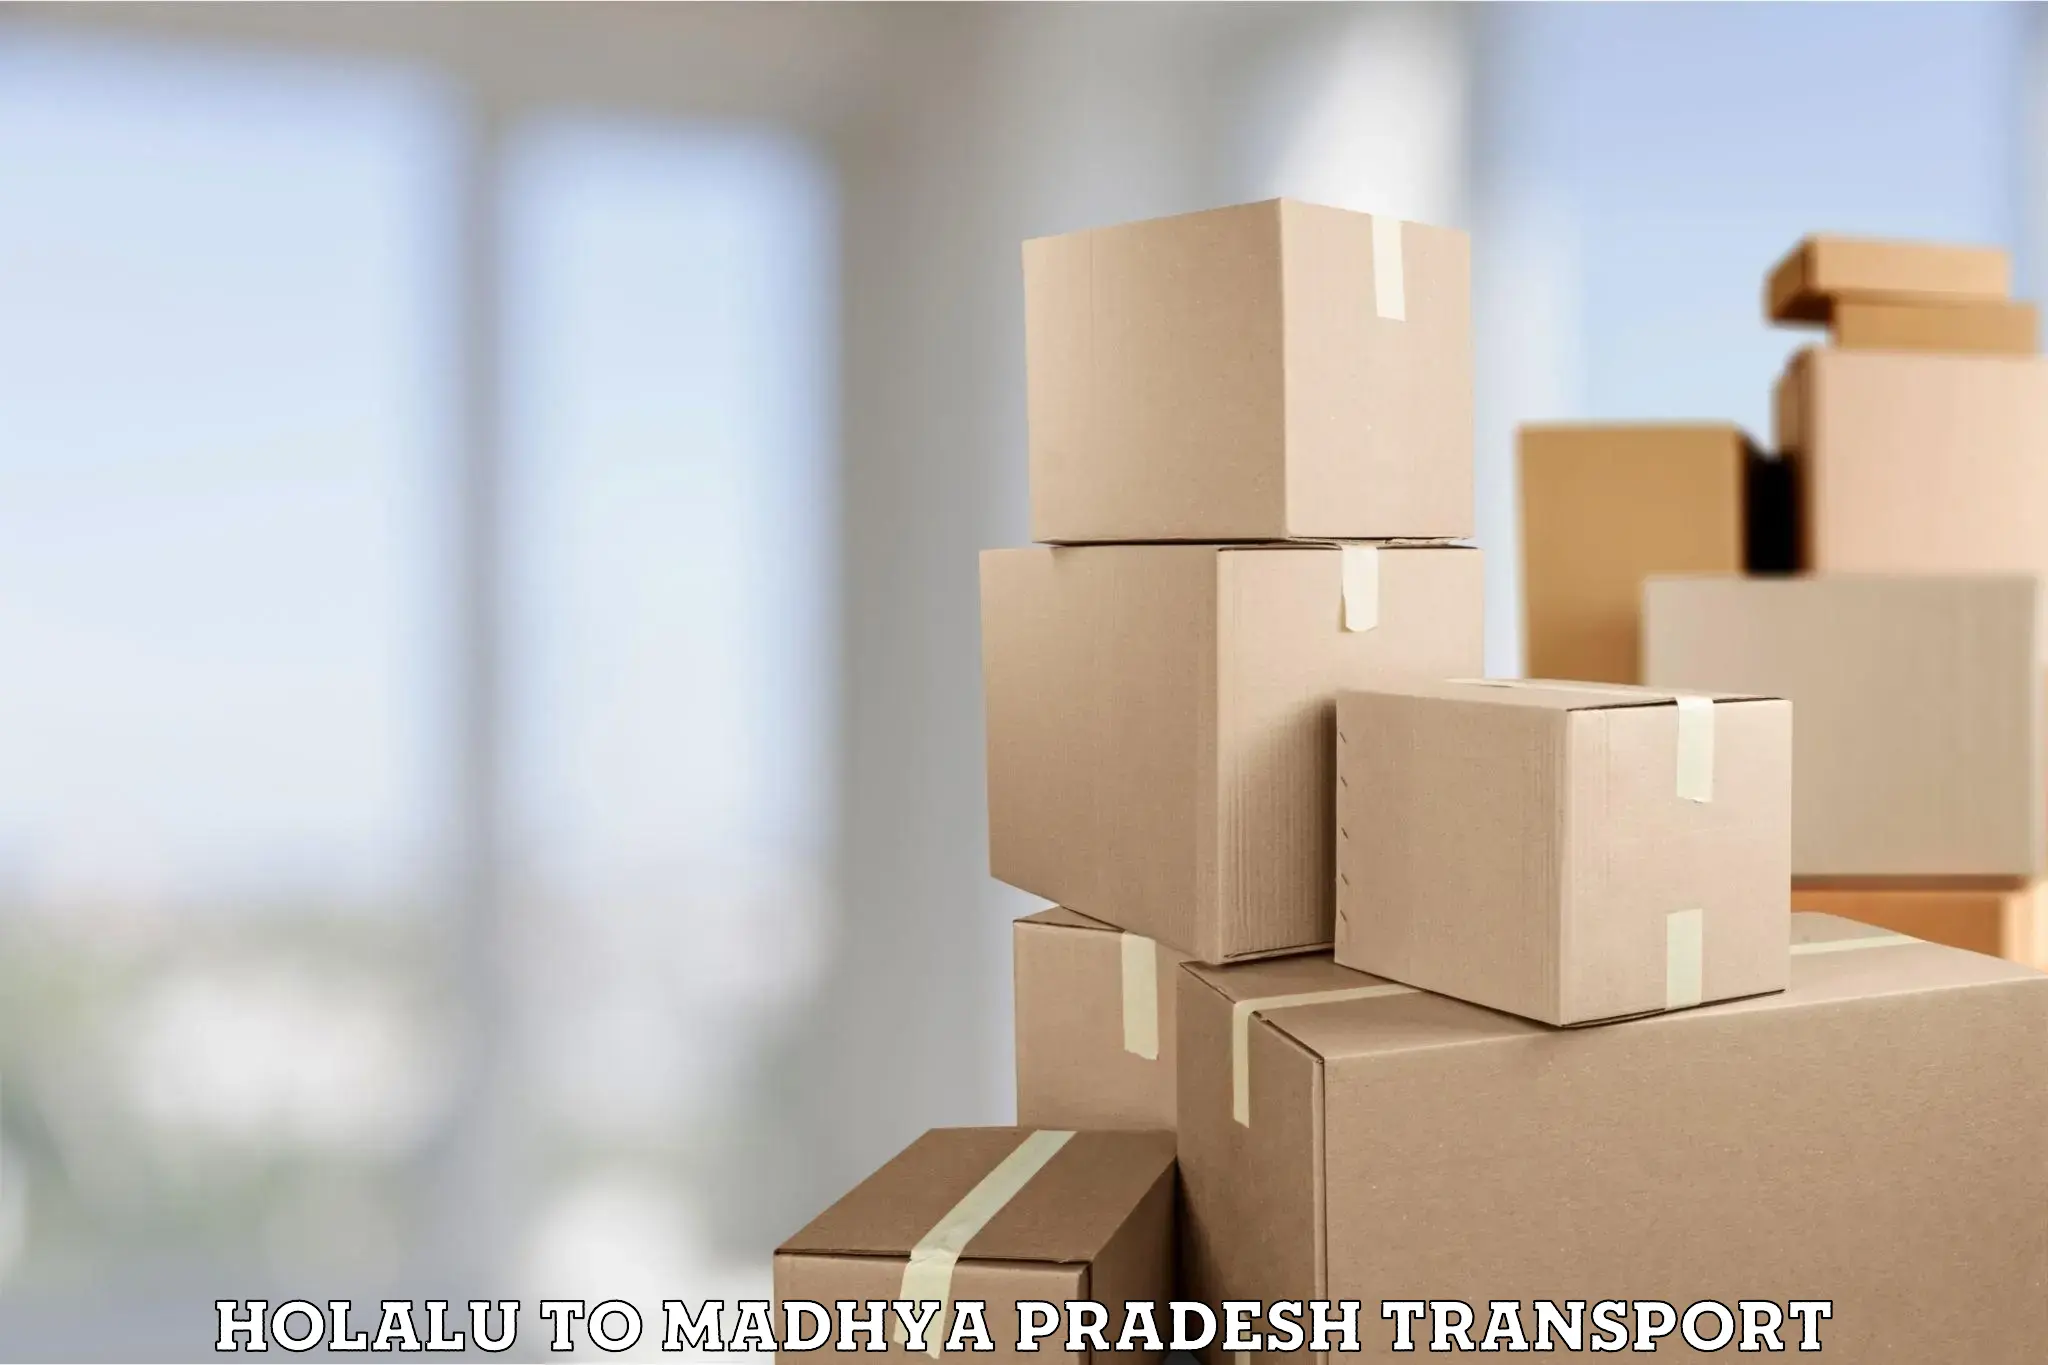 Express transport services Holalu to Indore